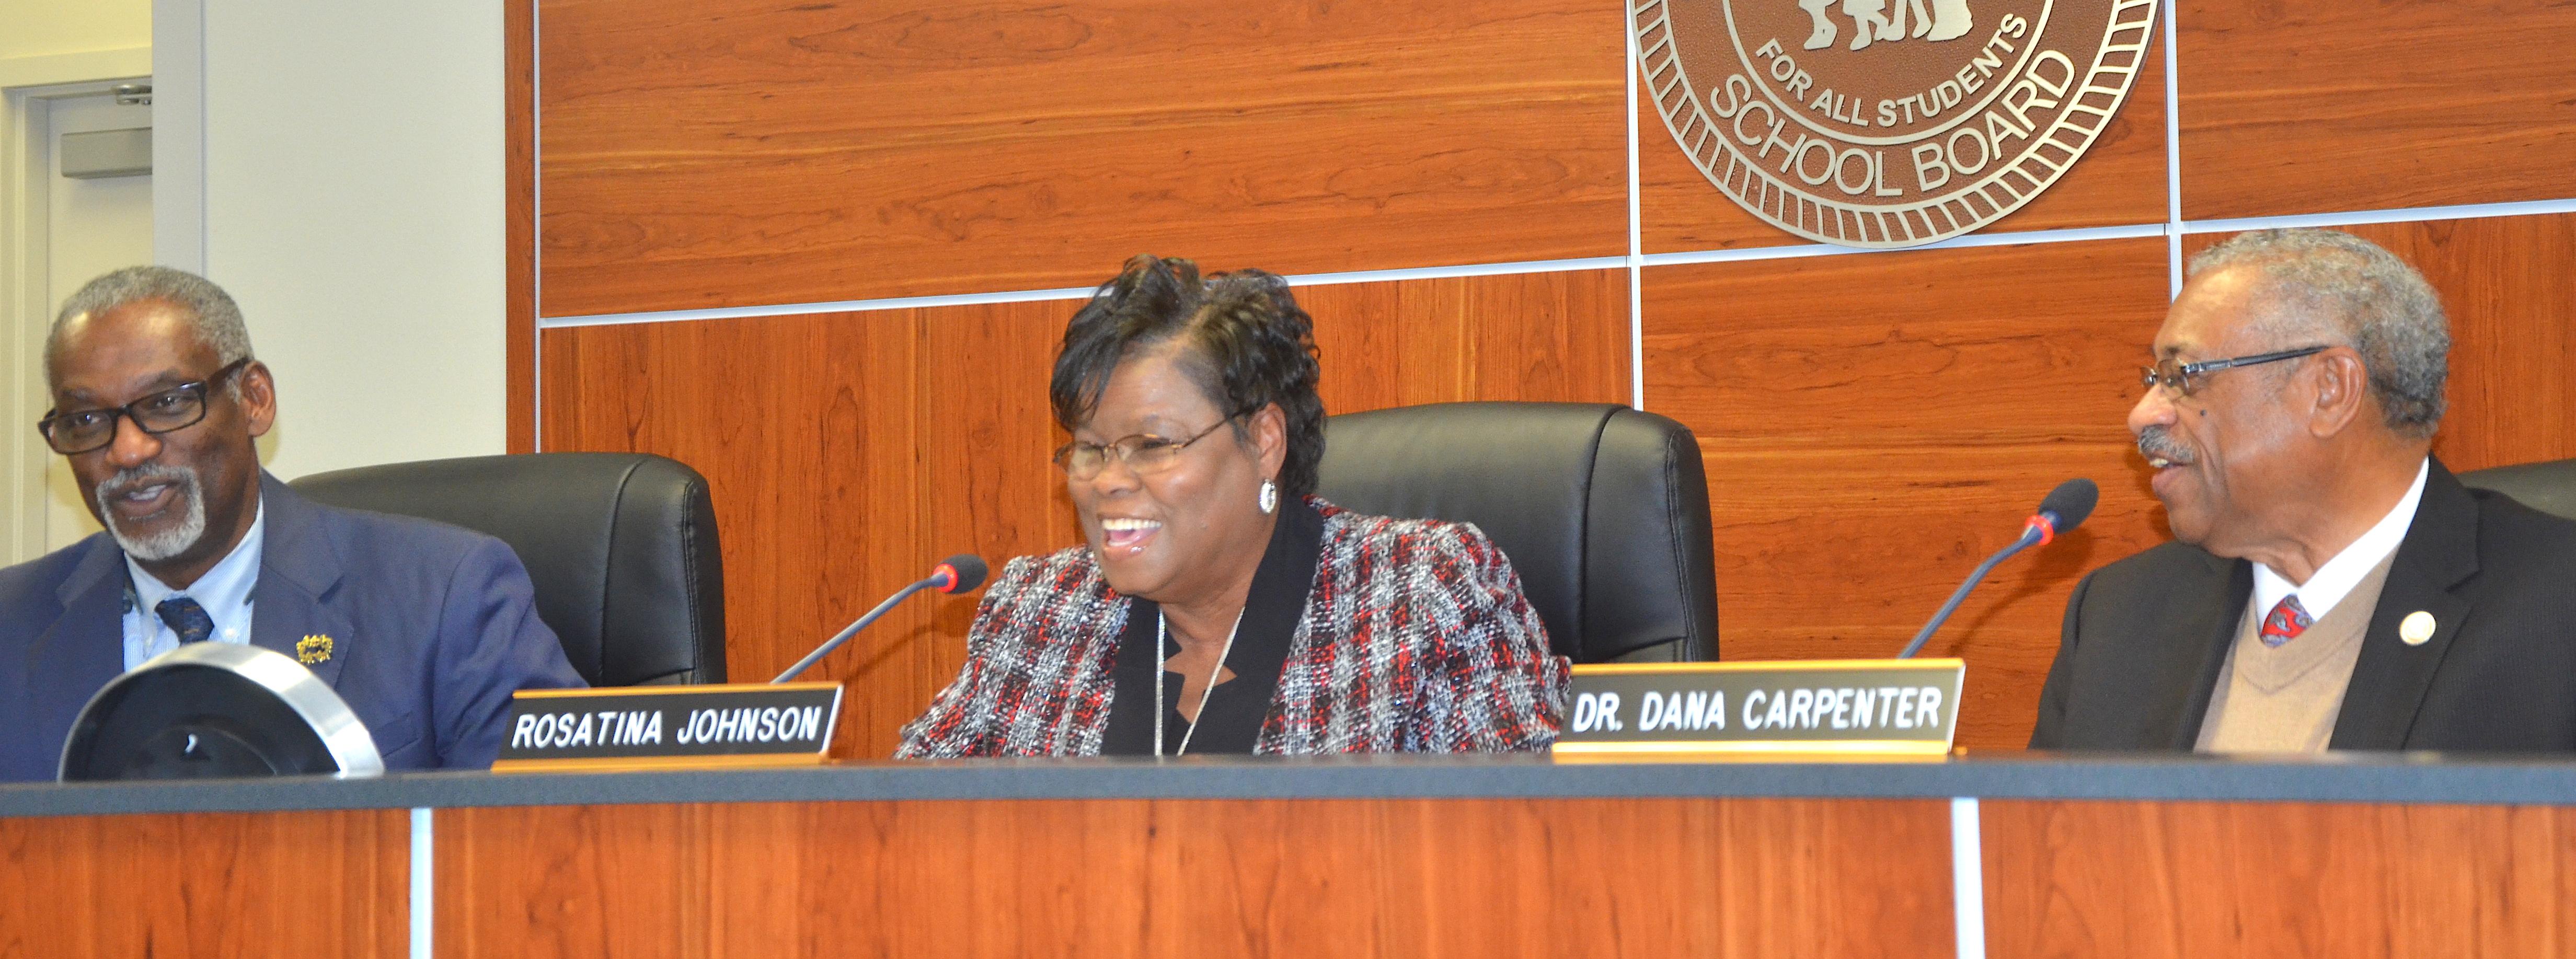 Photo of outgoing Baker school board President Rosatina  Johnson sharing a laugh with incoming Board President Dr. Dana Carpenter